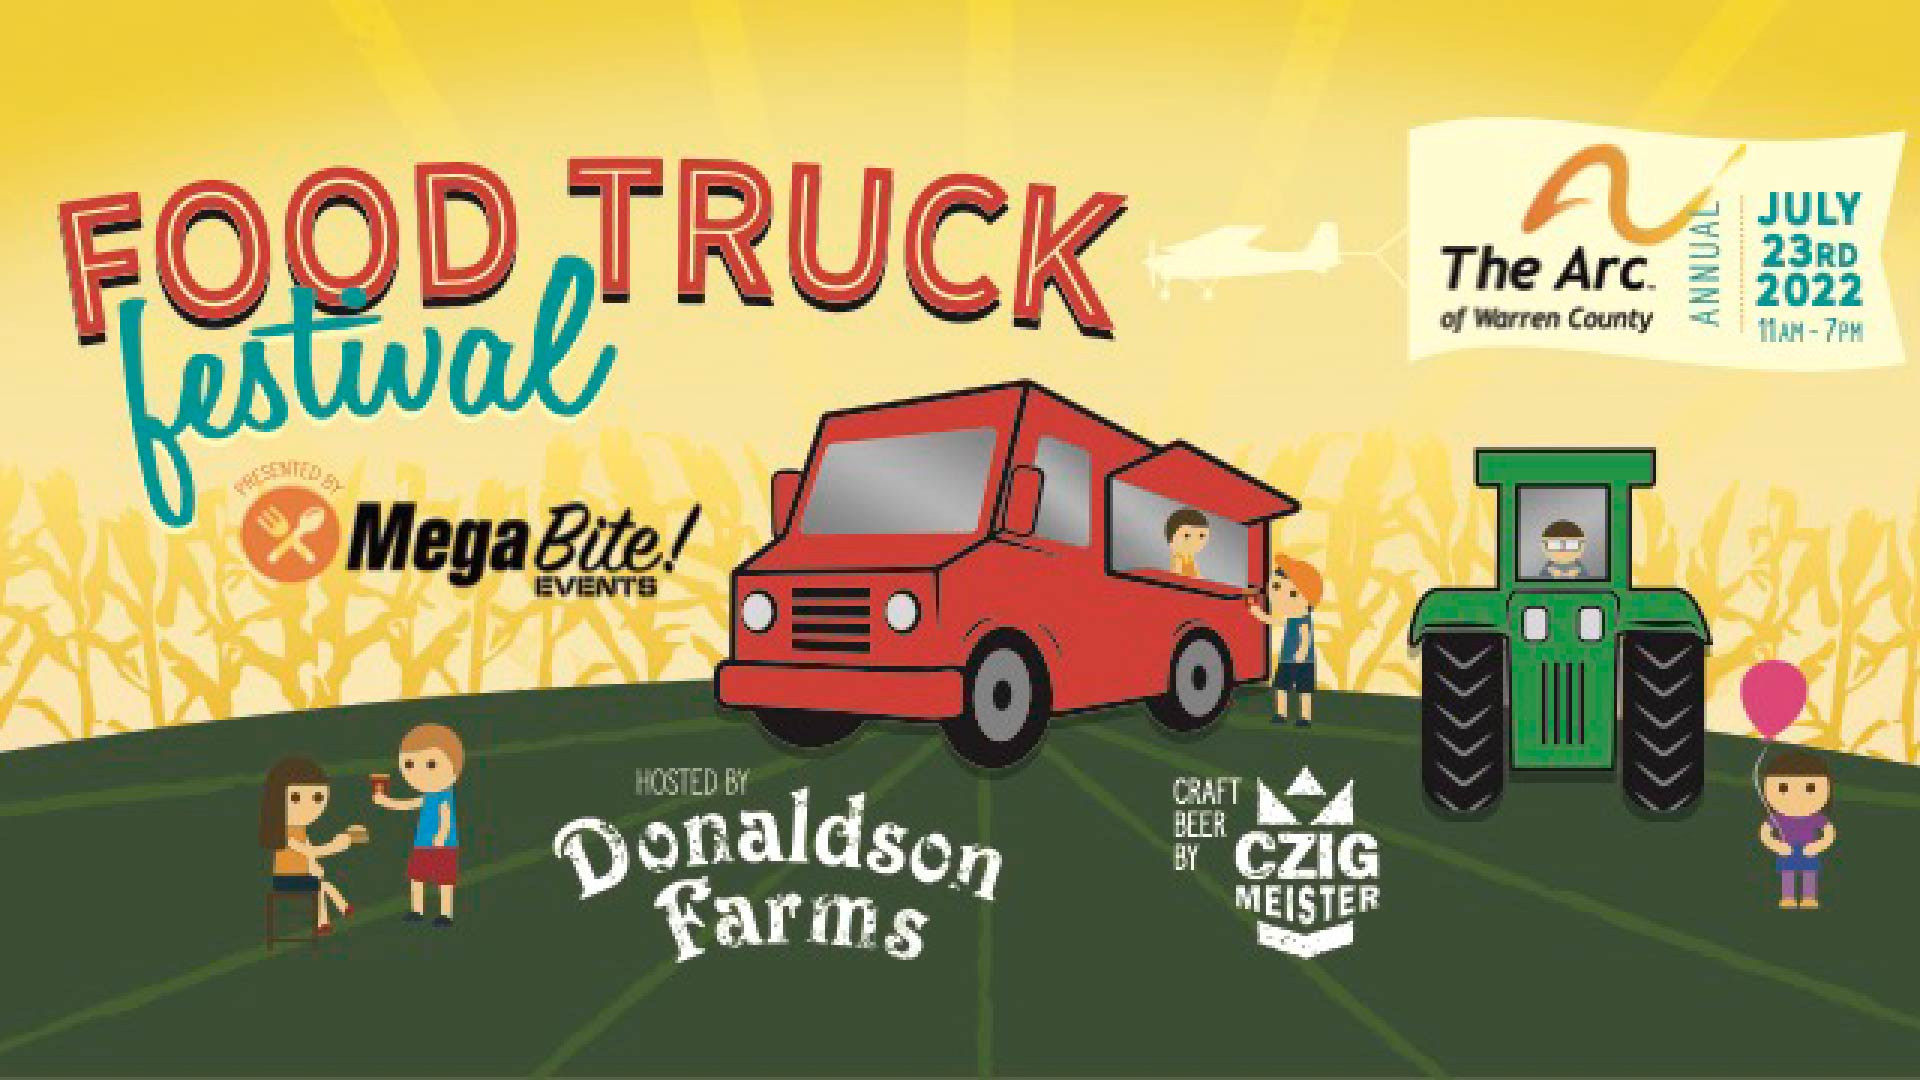 Food truck festival at Donaldson Farms in Hackettstown, NJ benefitting the ARC of Warren County